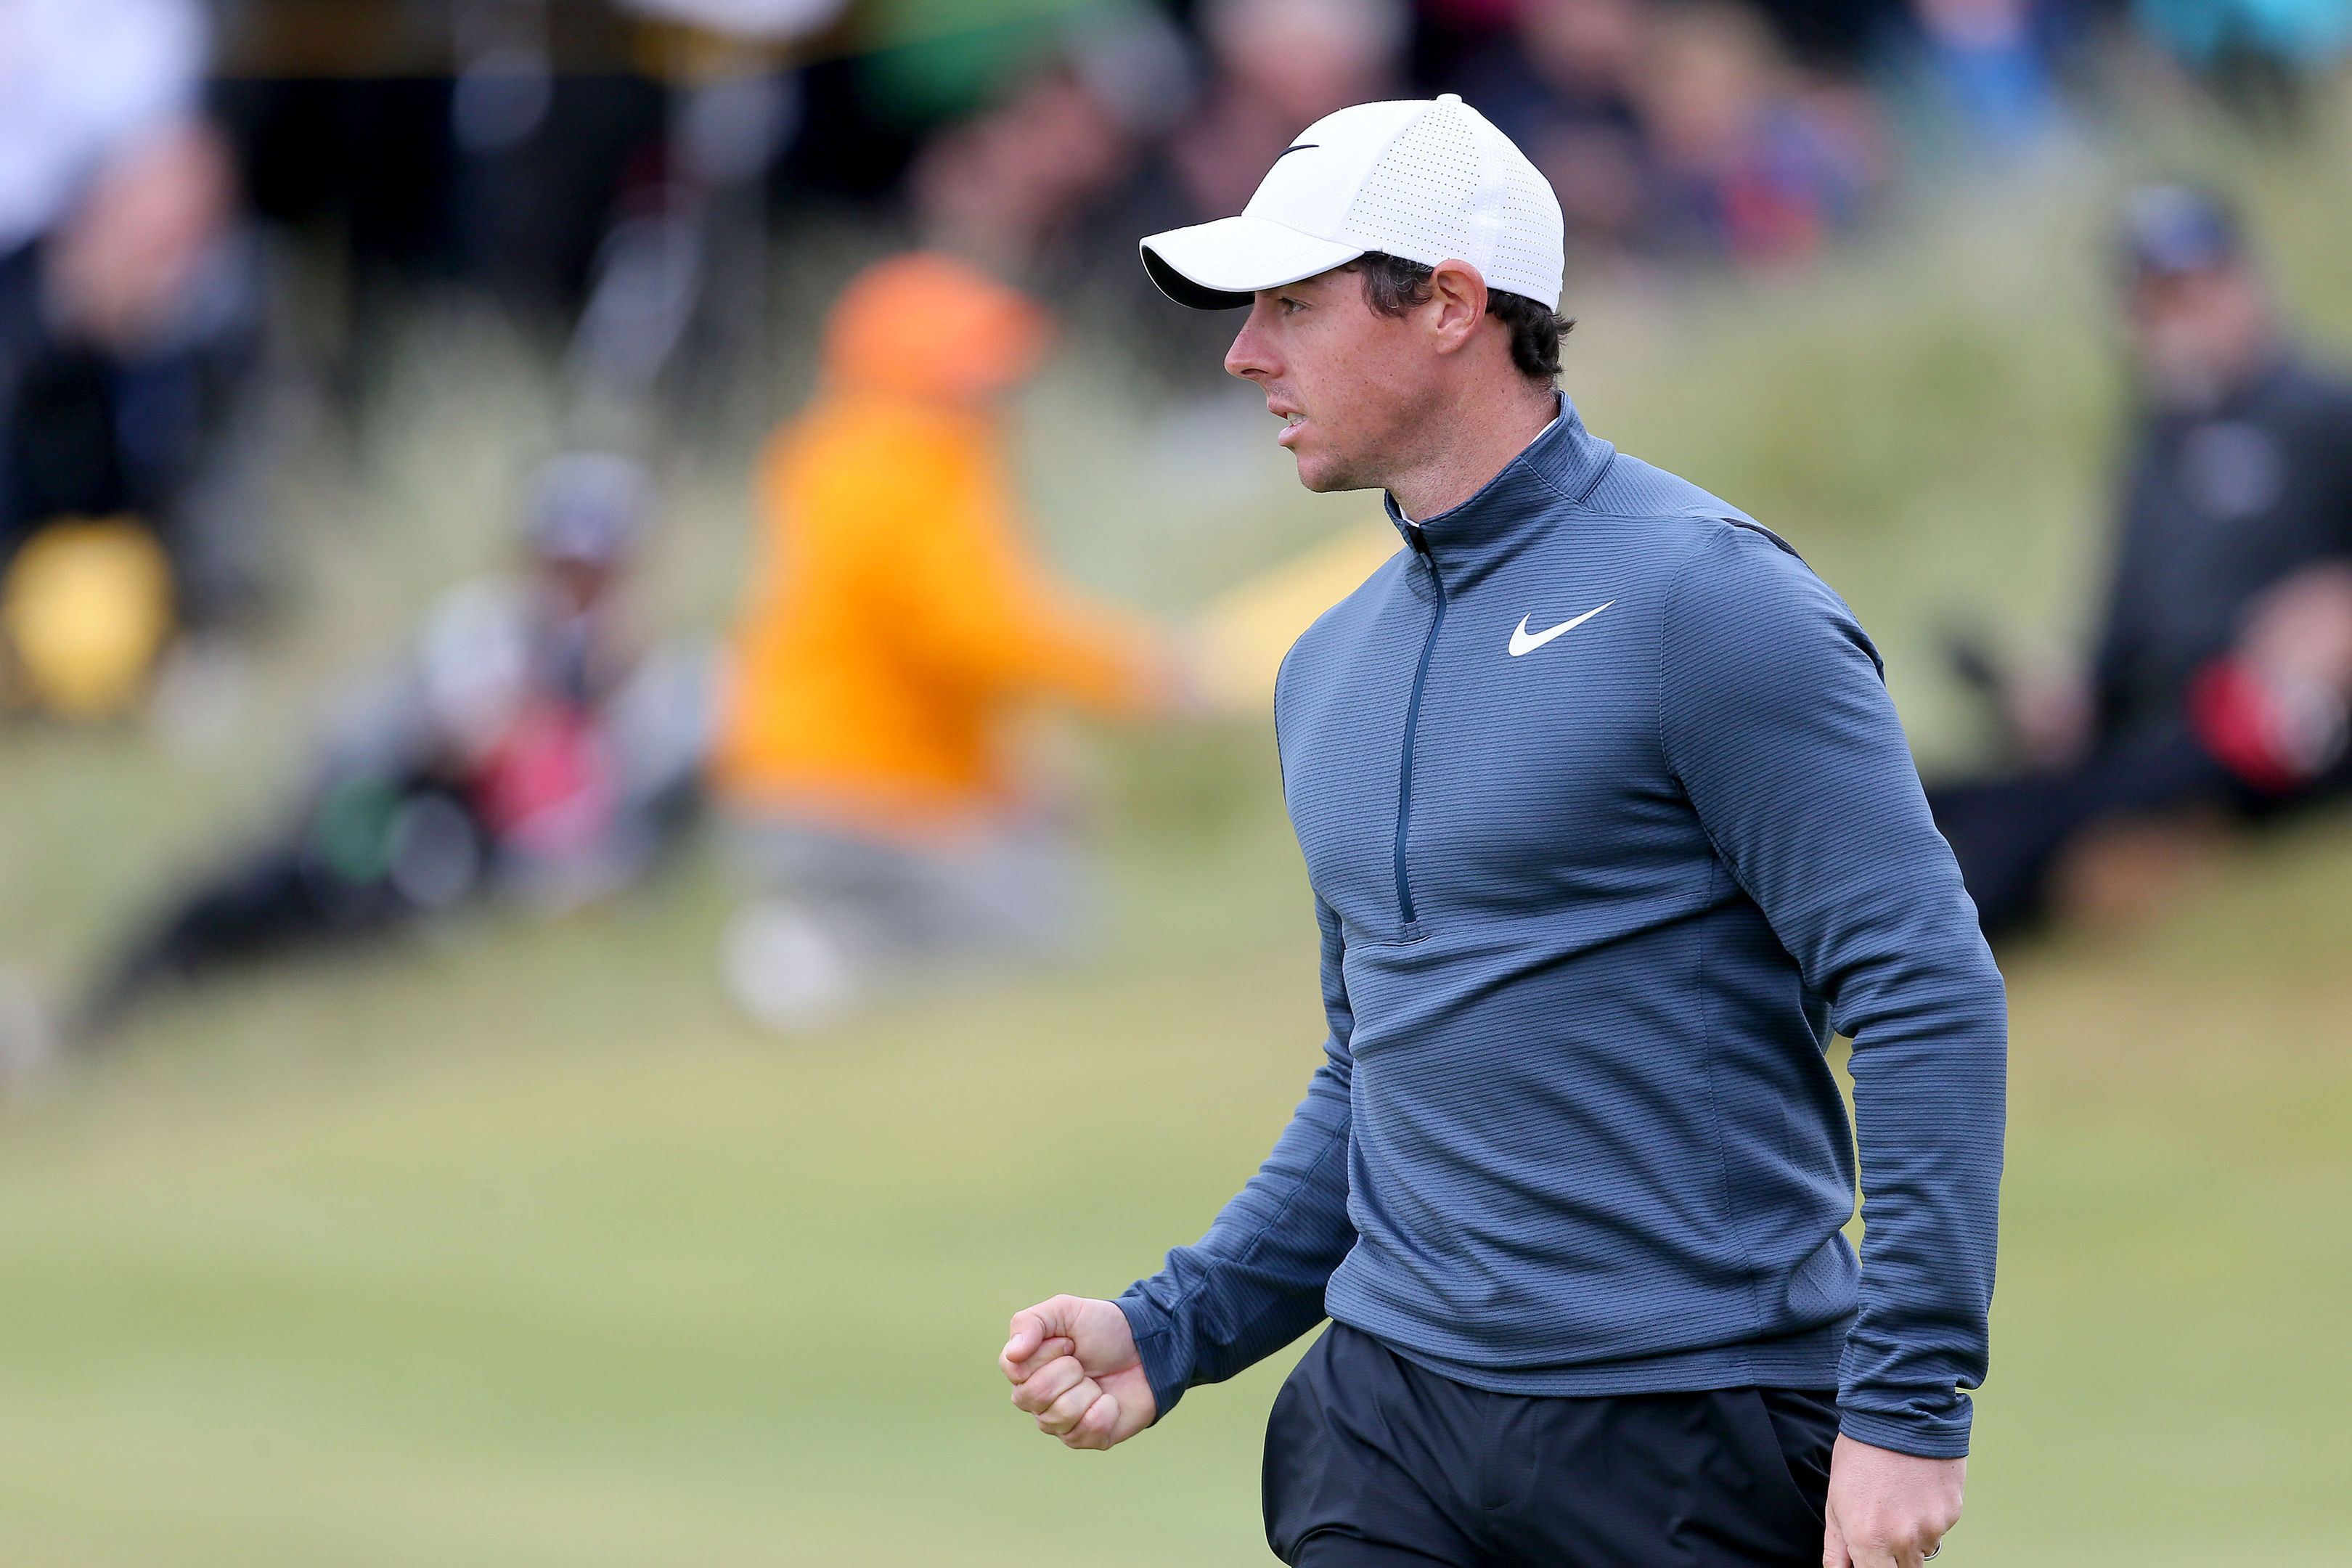 Rory McIlroy makes another putt during his second round 68 at Royal Birkdale.